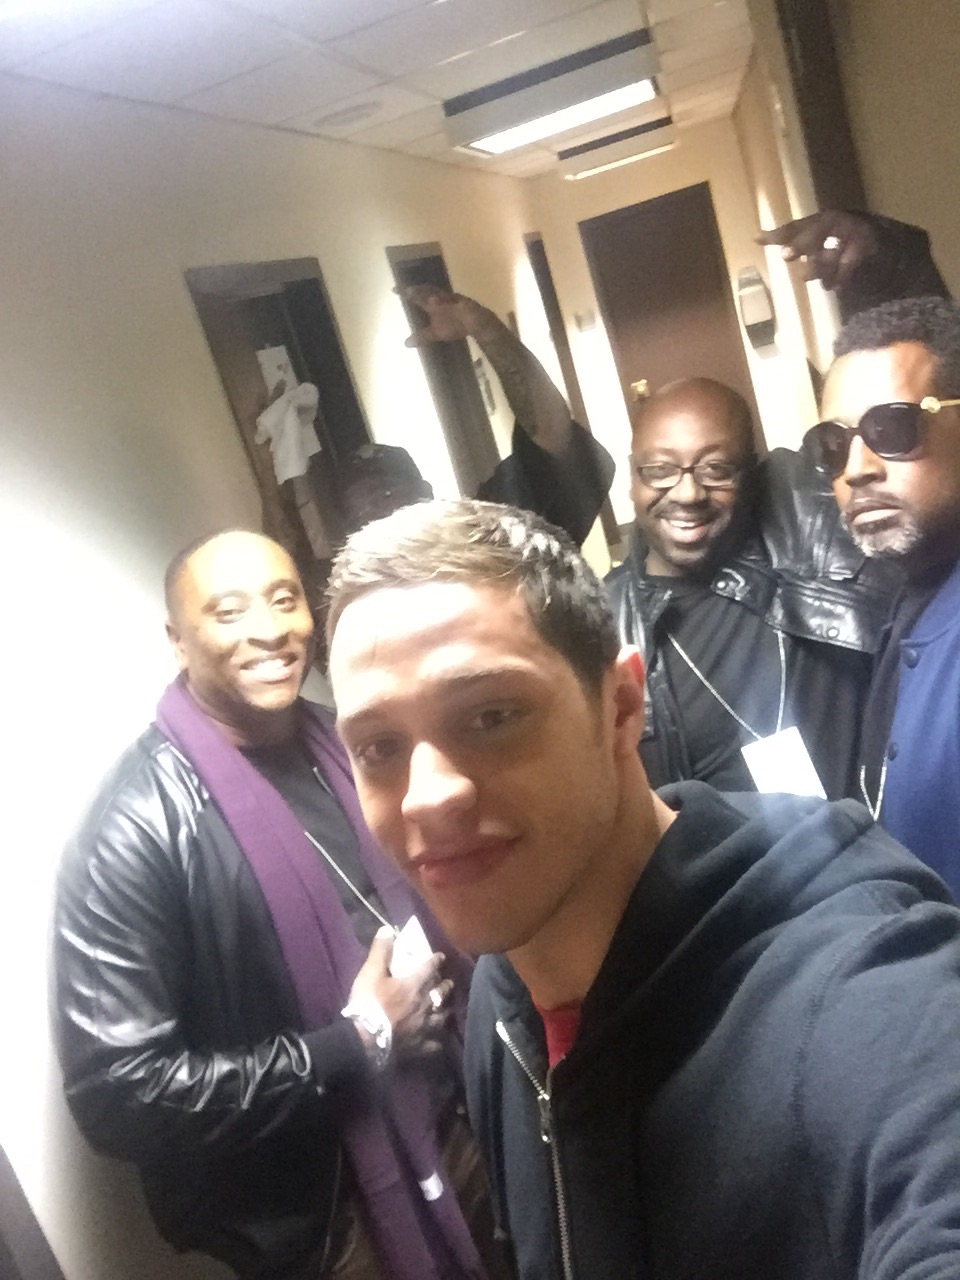 Co-Author Aswaad English with Kenan Thompson and Pete Davidson Backstage on Saturday Night Live November 20, 2016